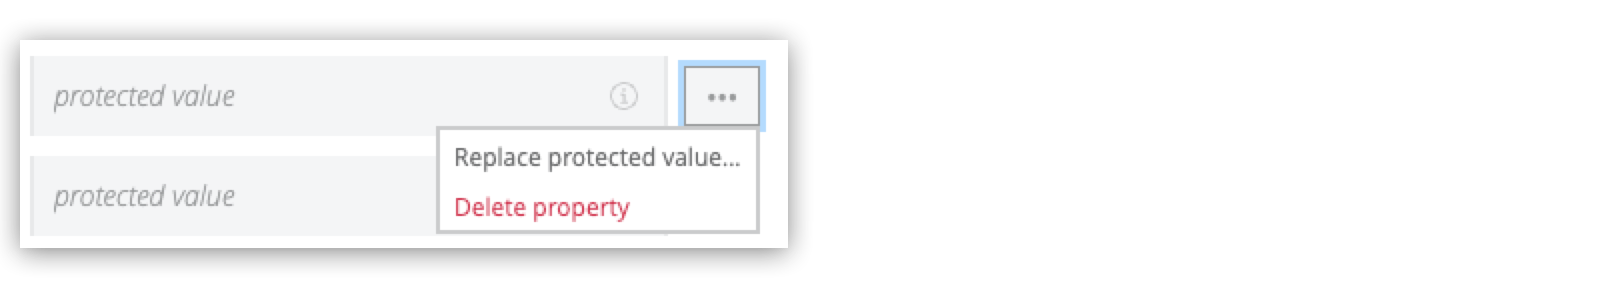 Replace protected value option